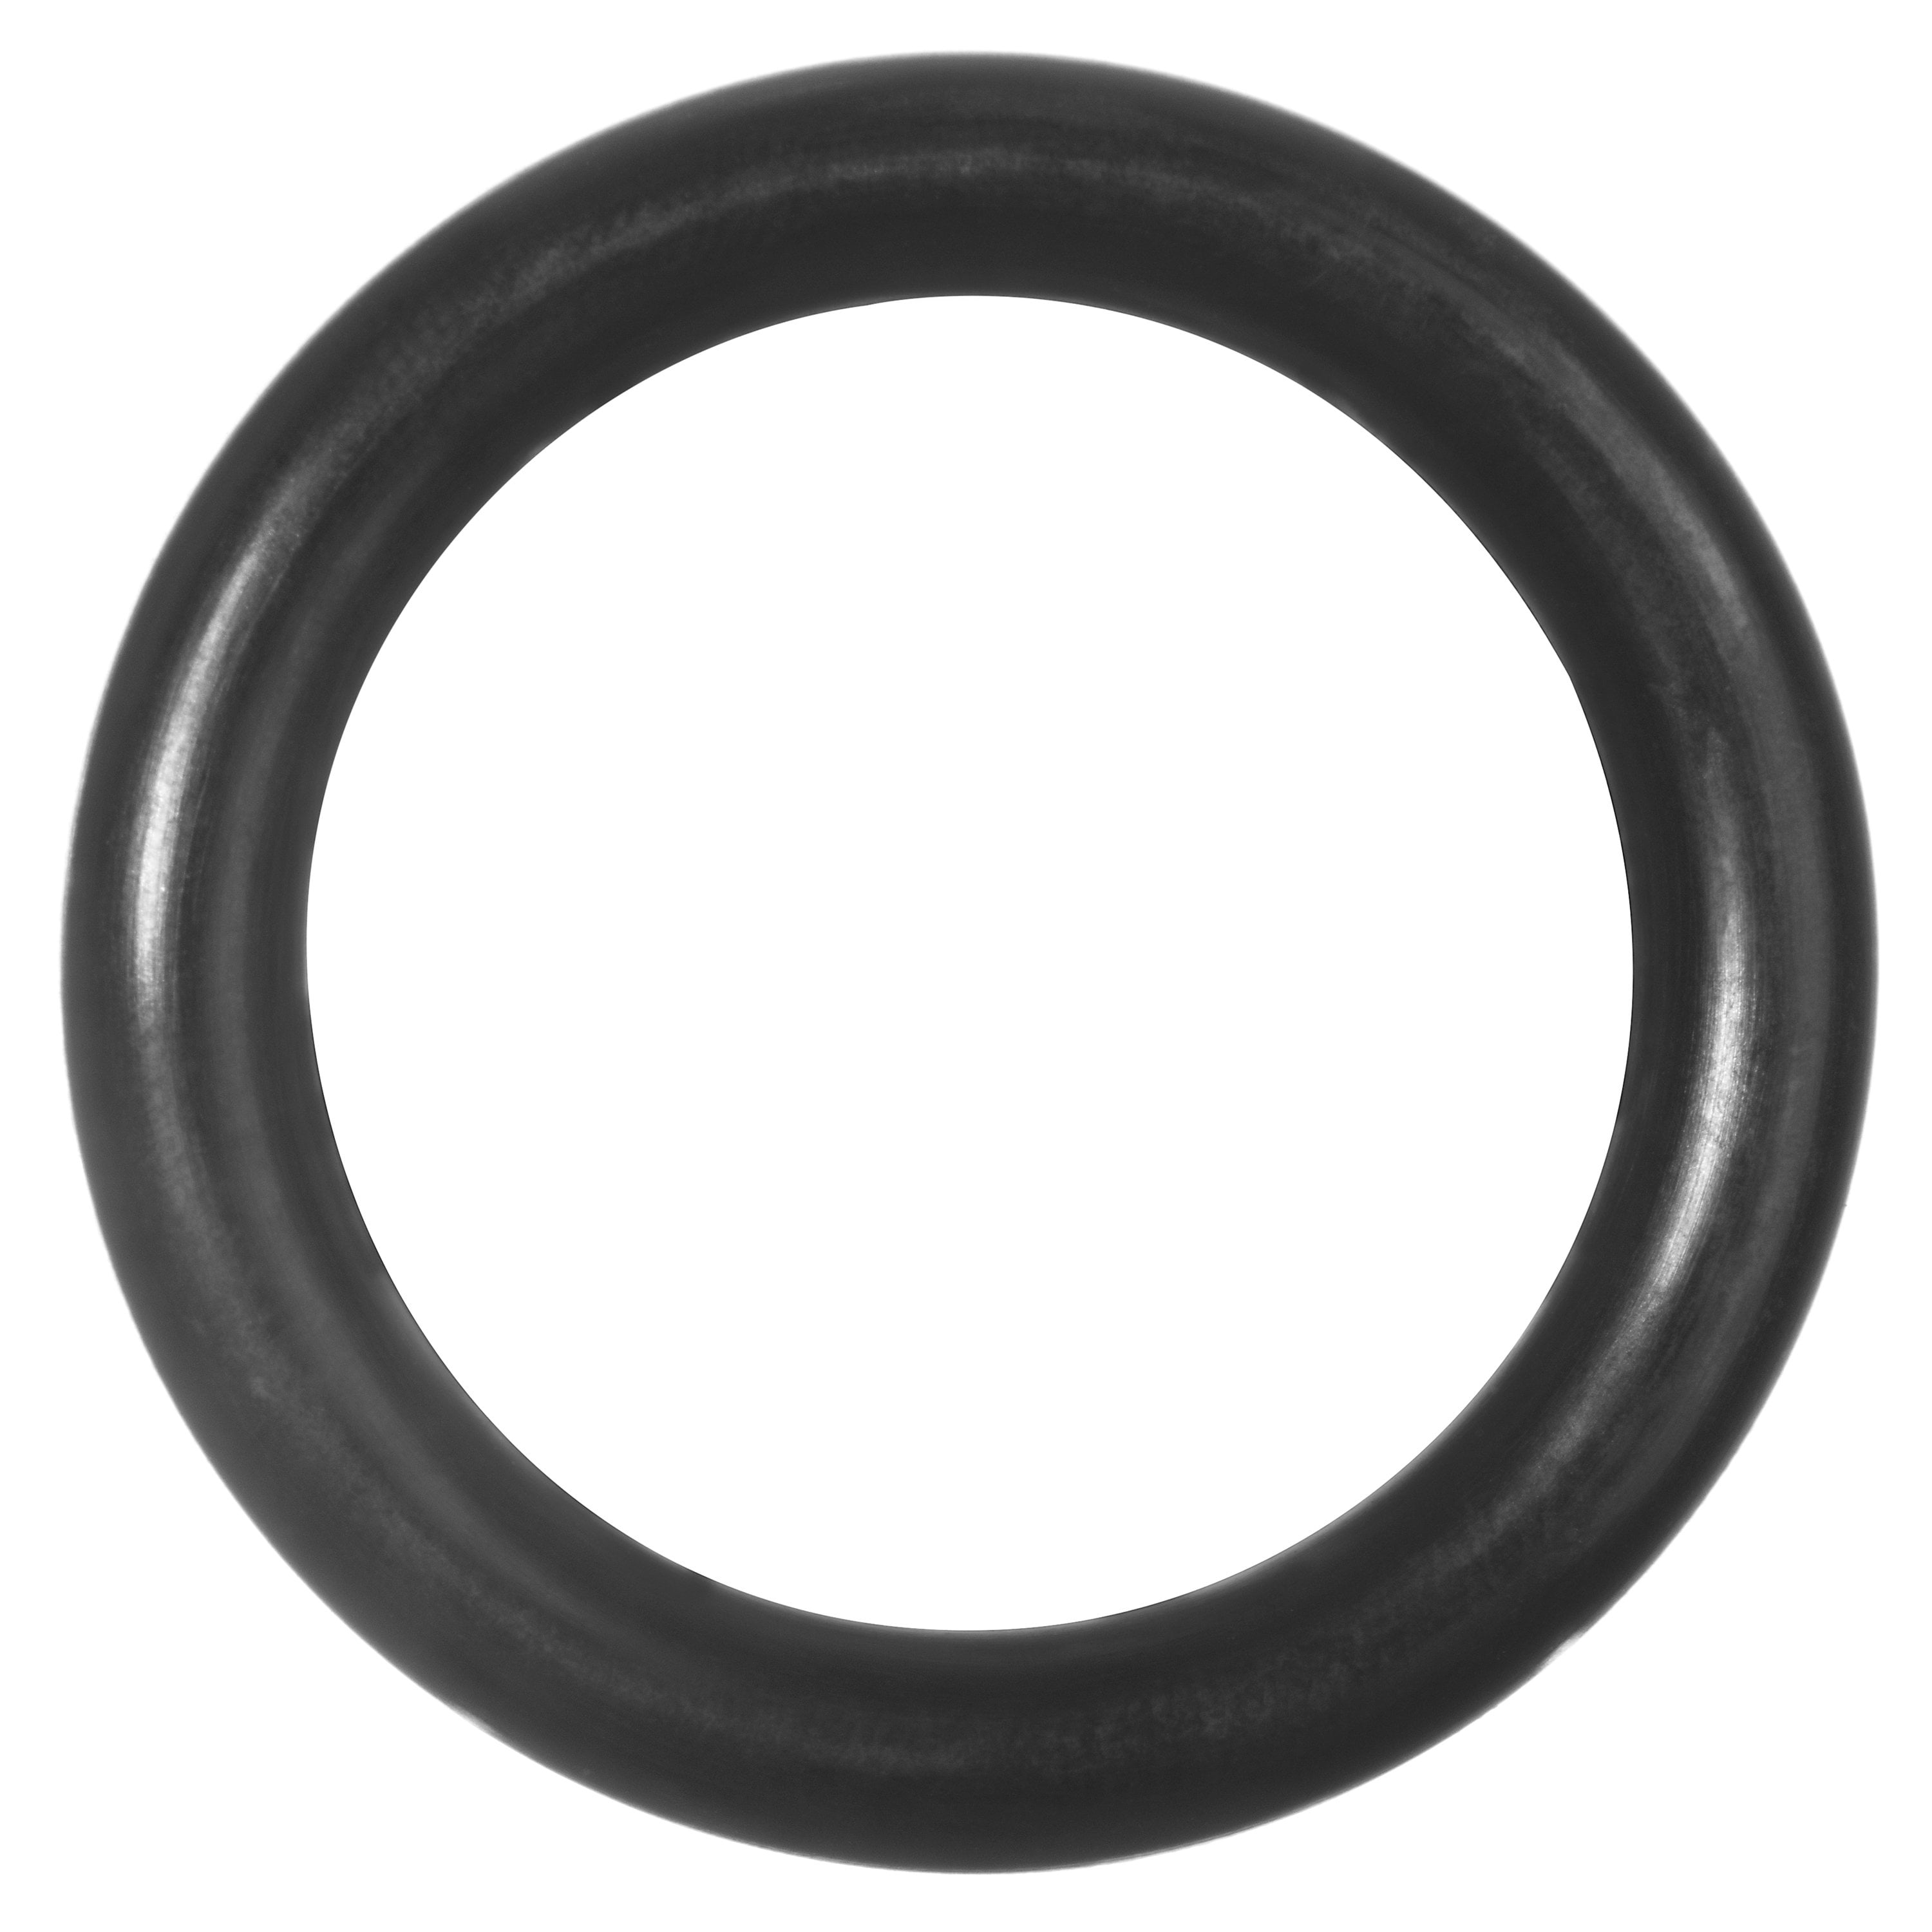 USA Sealing Inc Buna-N O-Ring-6mm Wide 158mm ID-Pack of 2